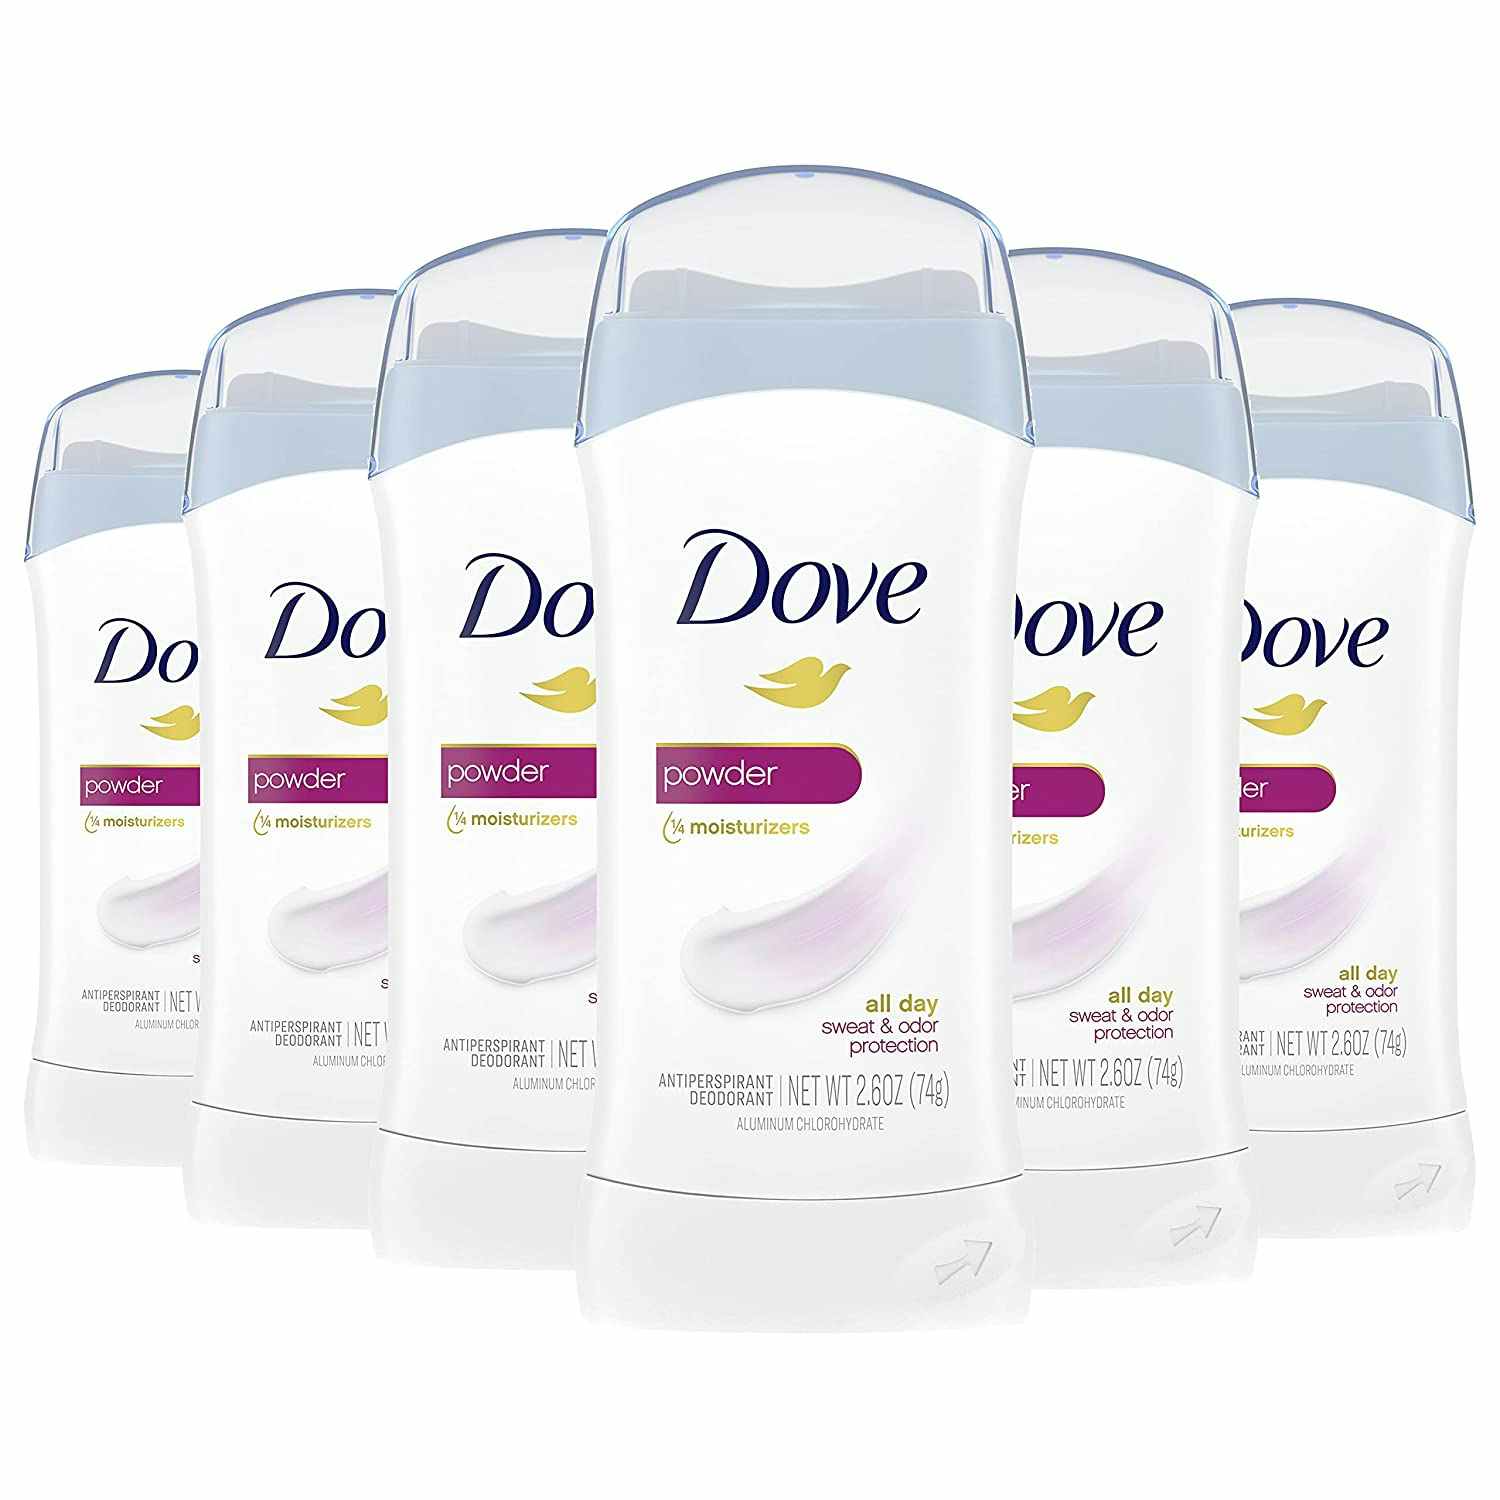 A pack of six Dove deodorants in front of a white background.